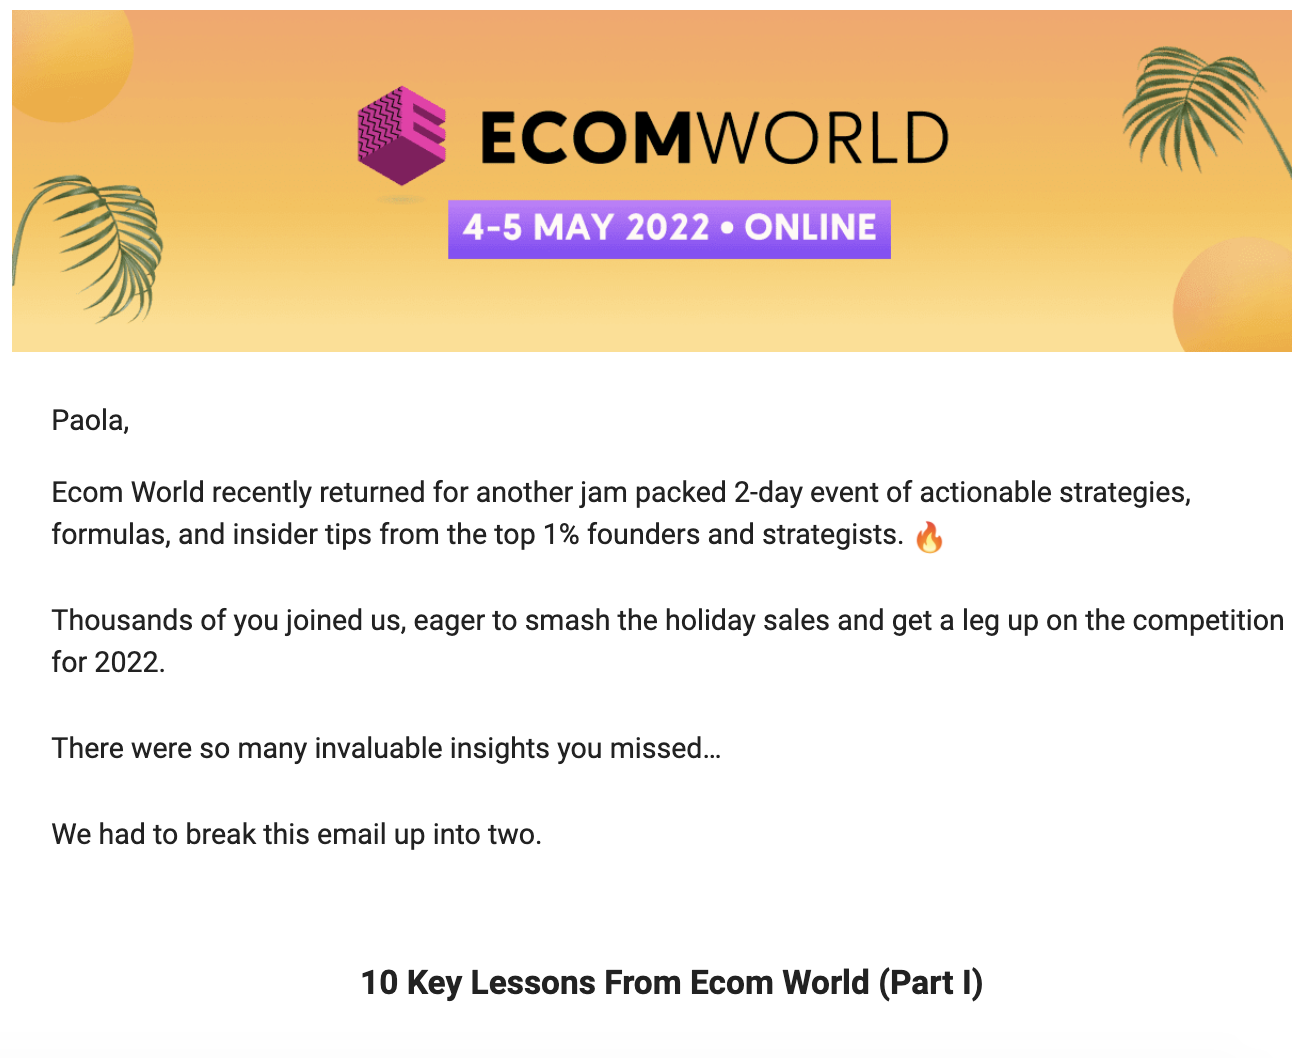 Post-event email example from Ecom World